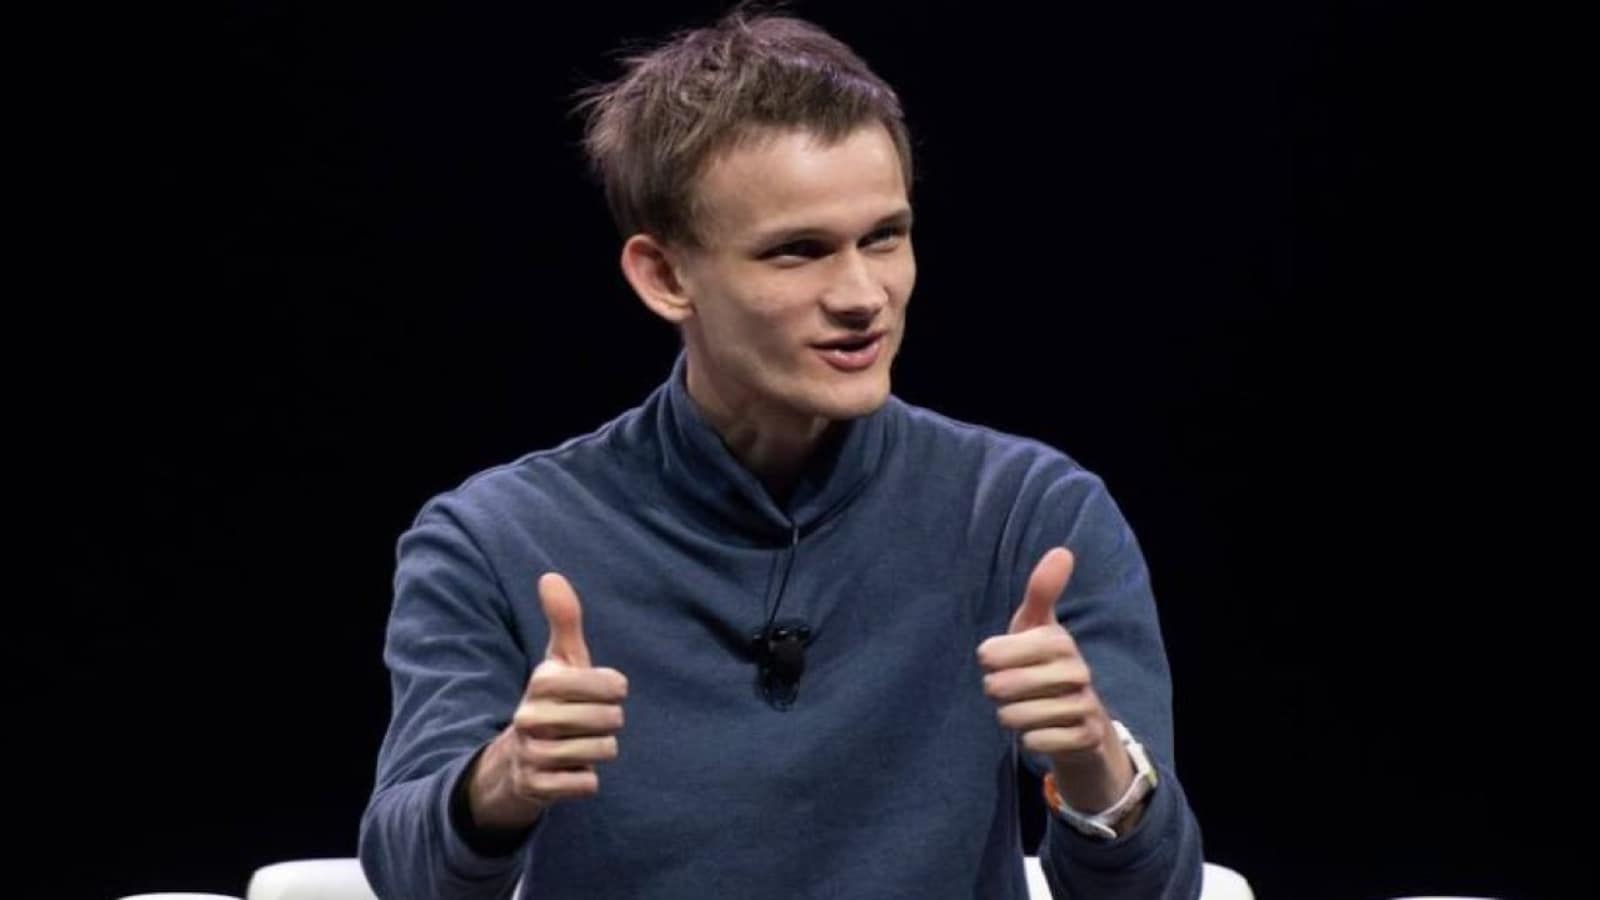 Cryptocurrencies Most Useful in Emerging Economies, Says Ethereum Co-Founder Vitalik Buterin